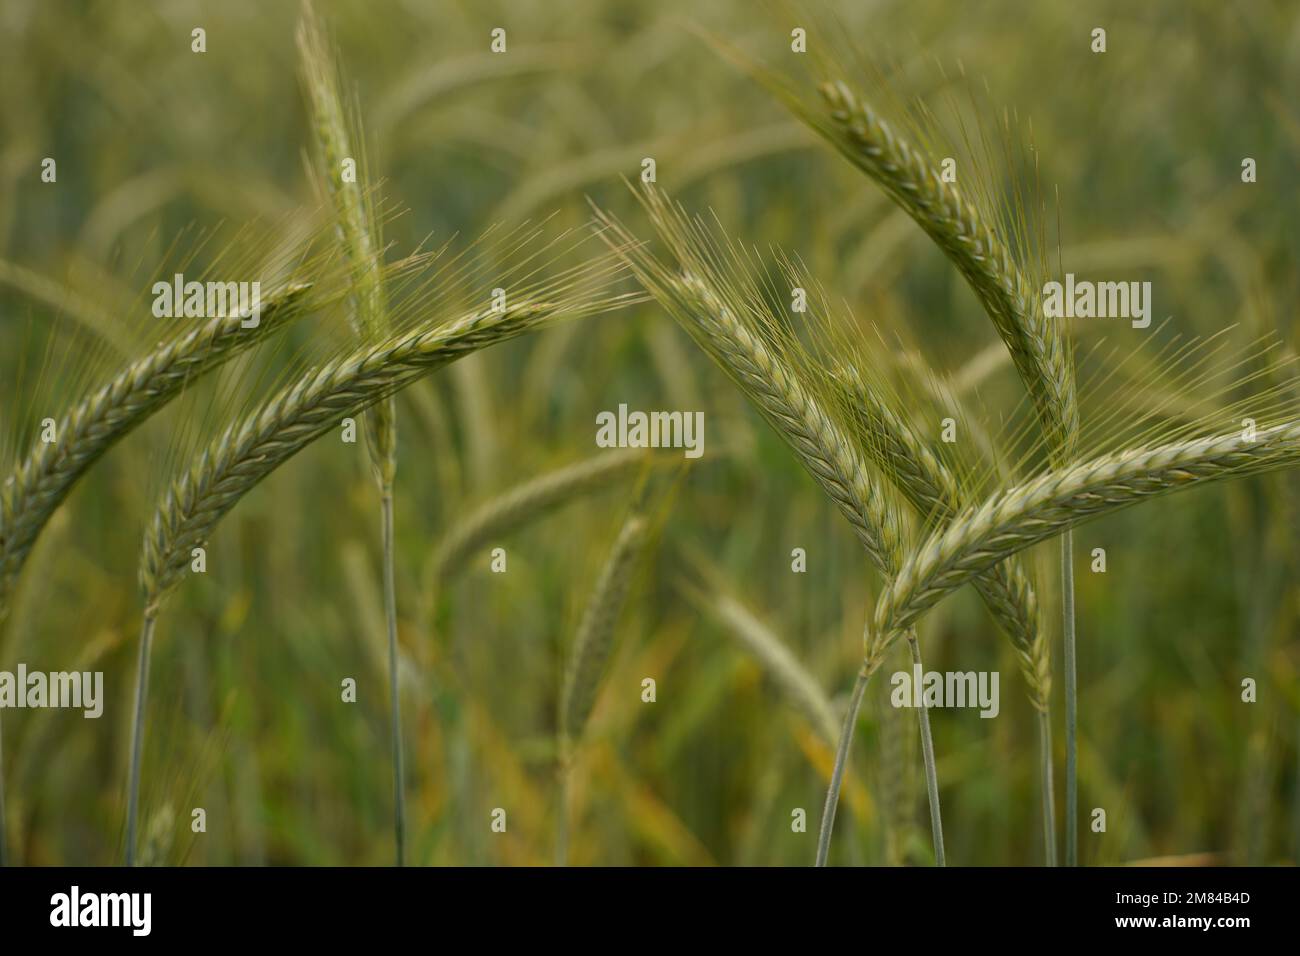 A green wheat spike close-up Stock Photo